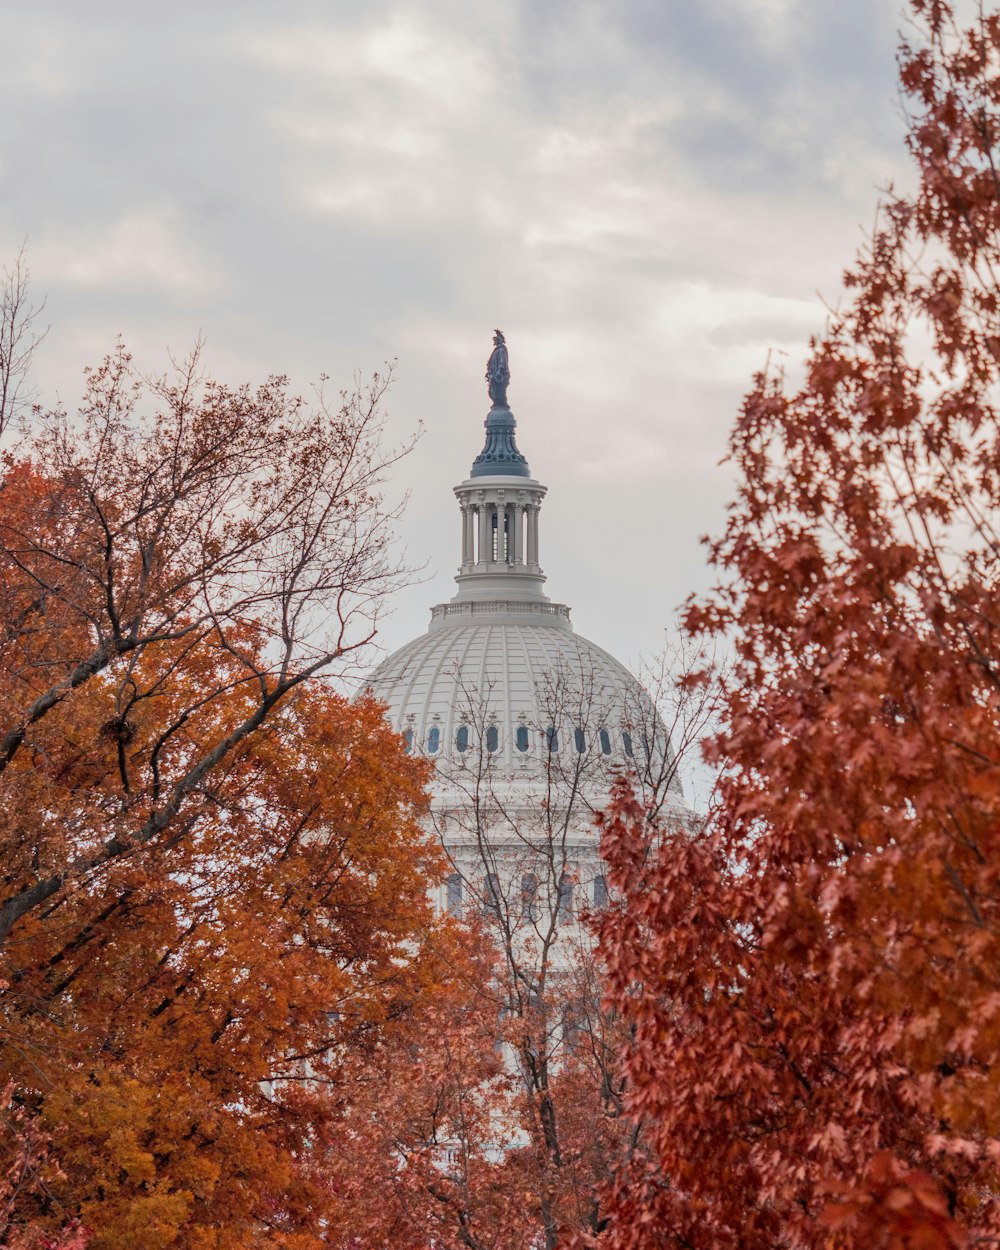 a view of the dome of the capitol building through the trees